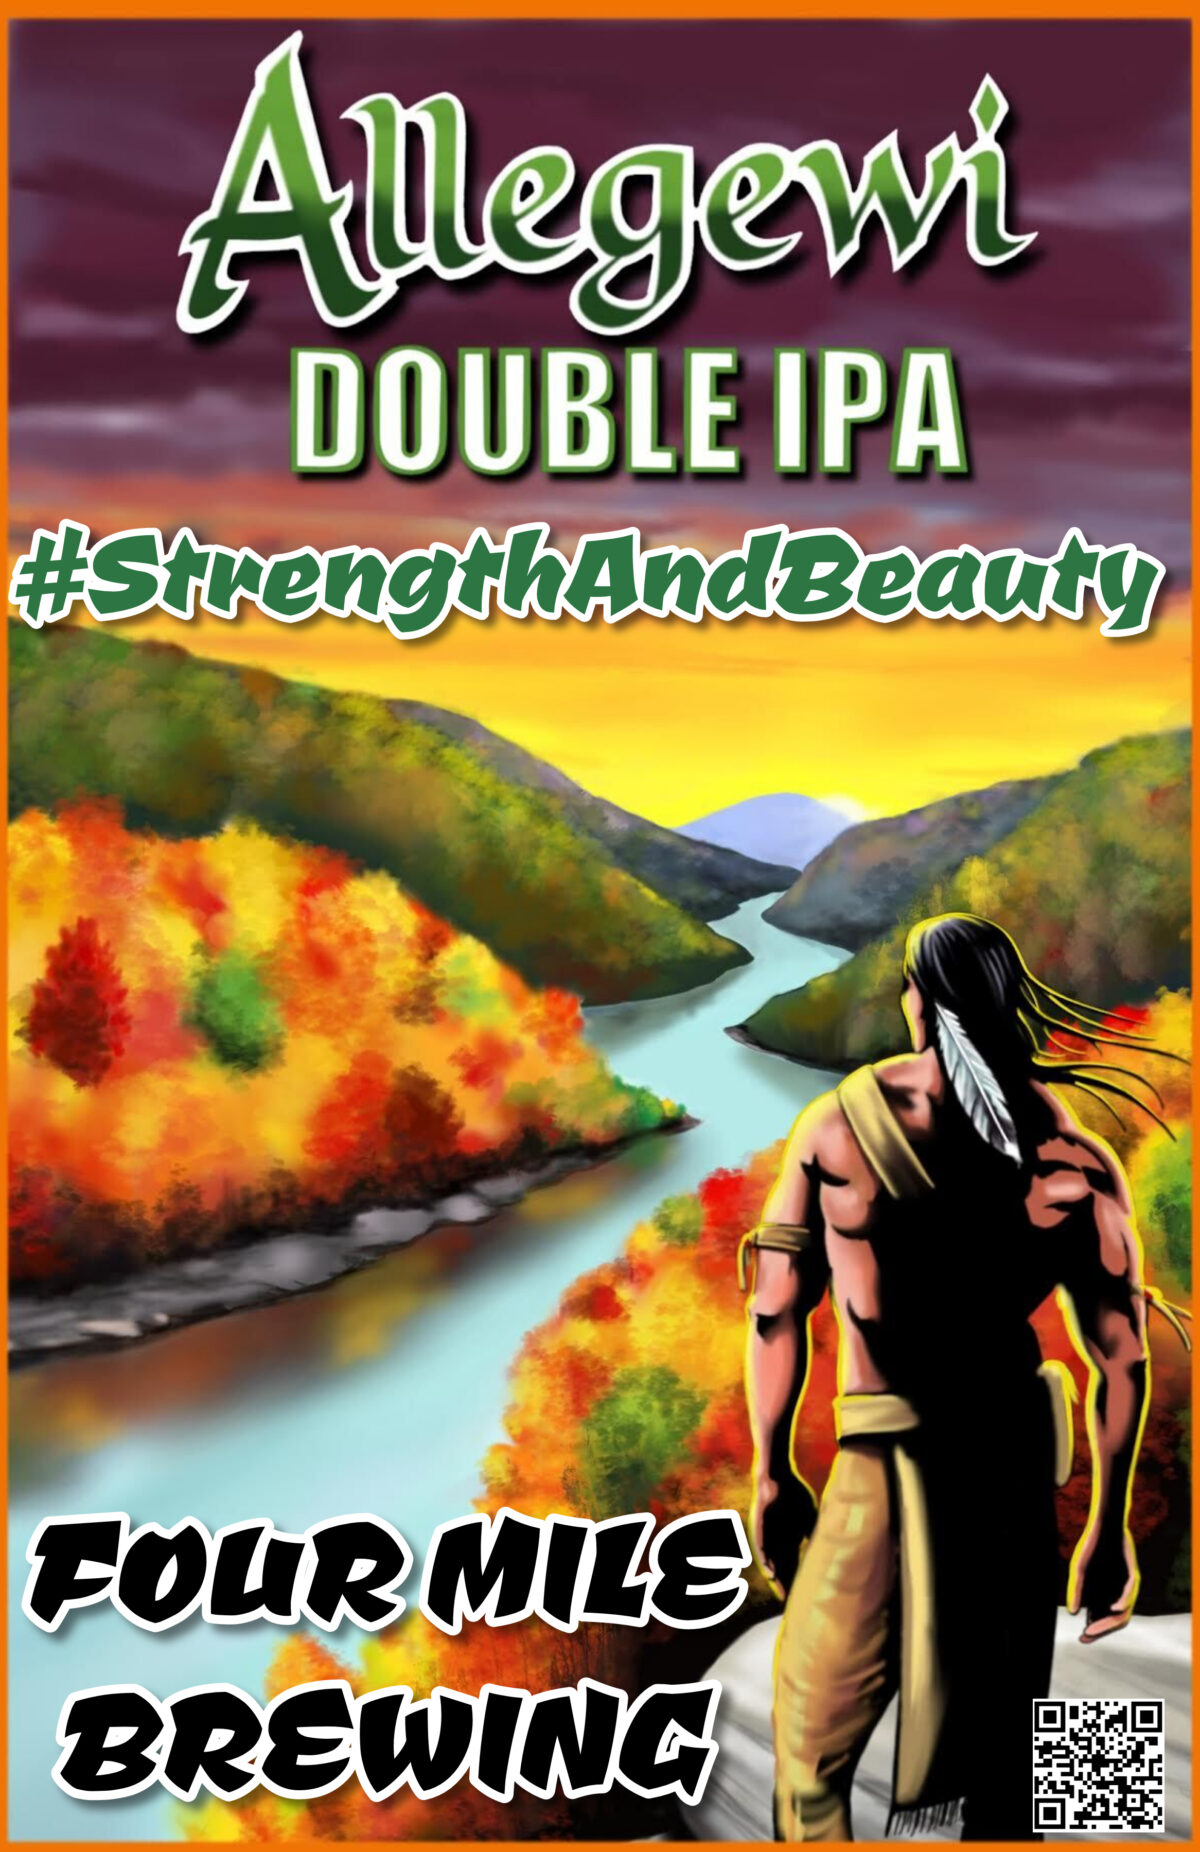 Legends roam the mountains and banks of the Allegheny. The Allegewi stood tall, strong, and proud. This Double IPA embodies this strength with subtlety. Notes of pine and grapefruit balanced with malty sweetness roam powerfully on one's palate. ALLEGEWI LIVES... #StrengthAndBeauty